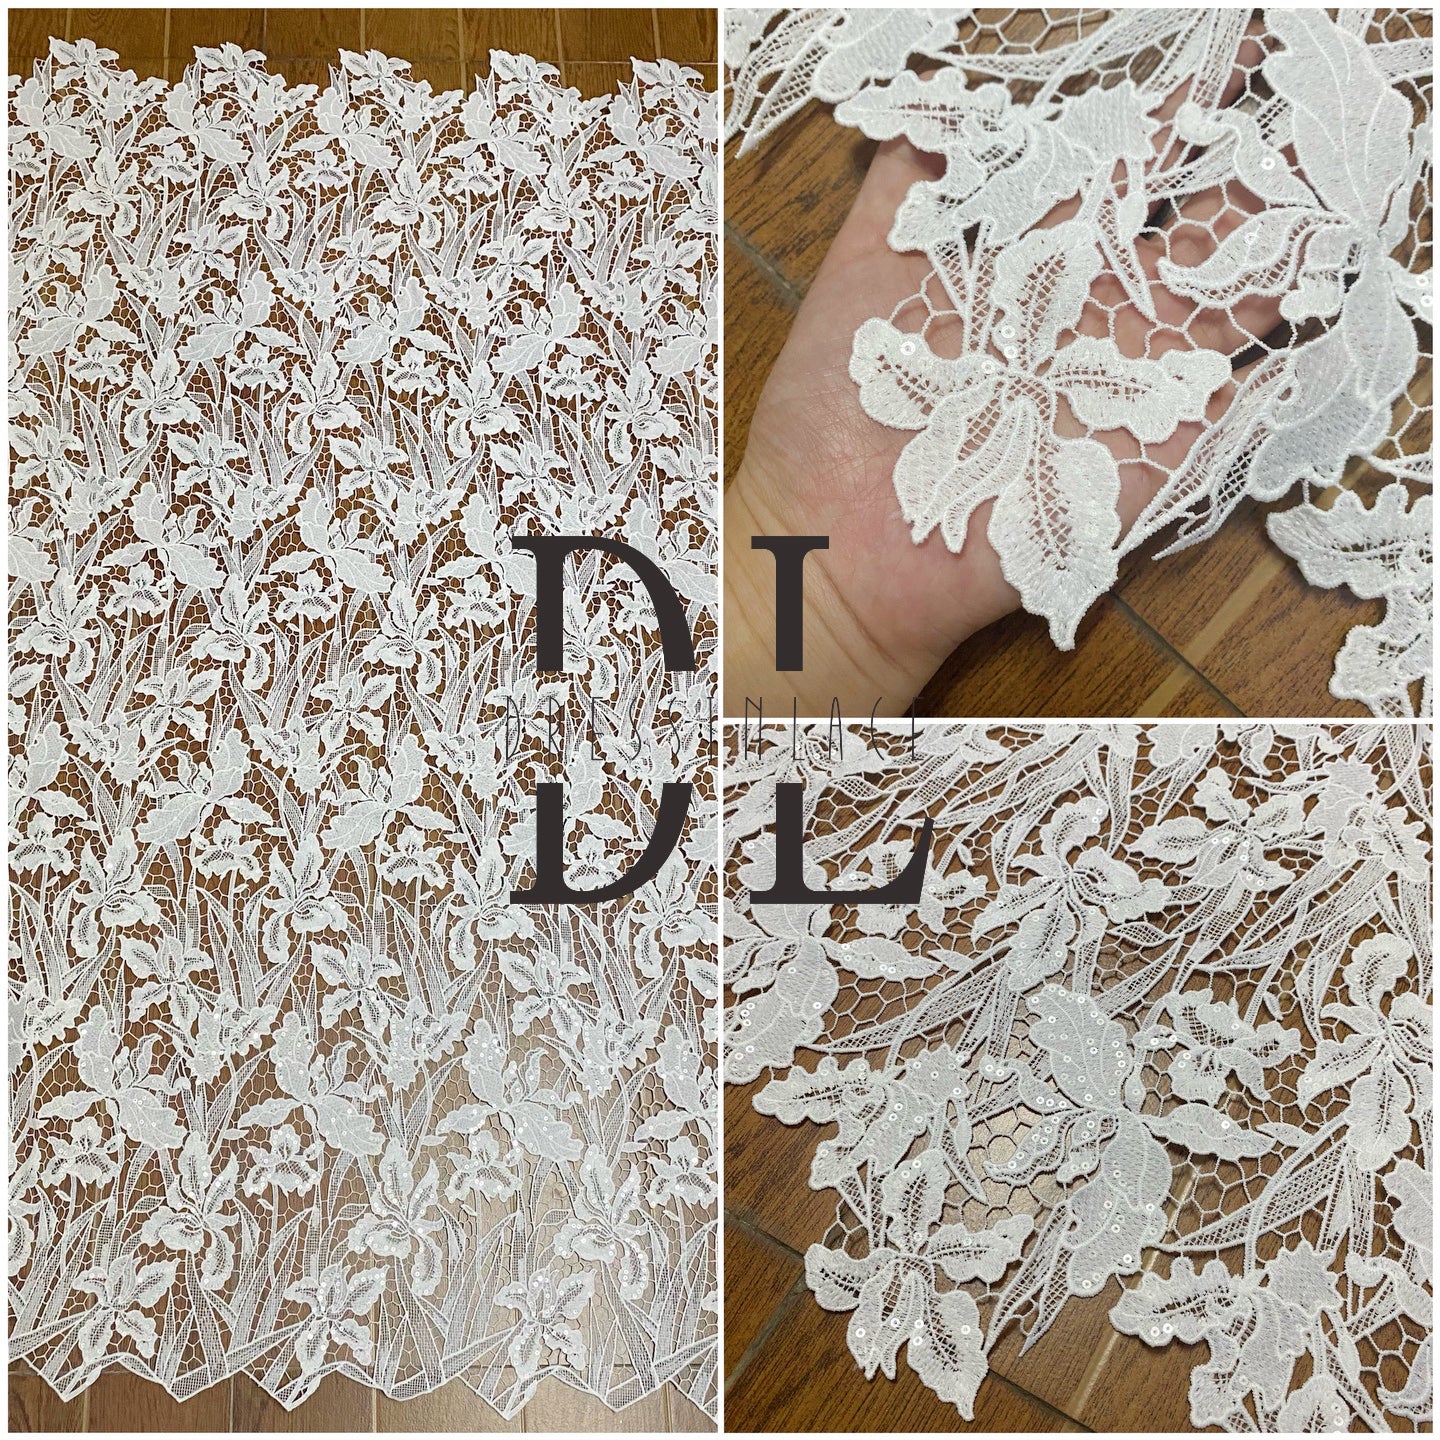 DLG120131 New Style Water Soluble Embroidered Lace Fabric - Exquisite Beauty of Lace with shiny sequins - Perfect for Bridal Dresses DLG120131